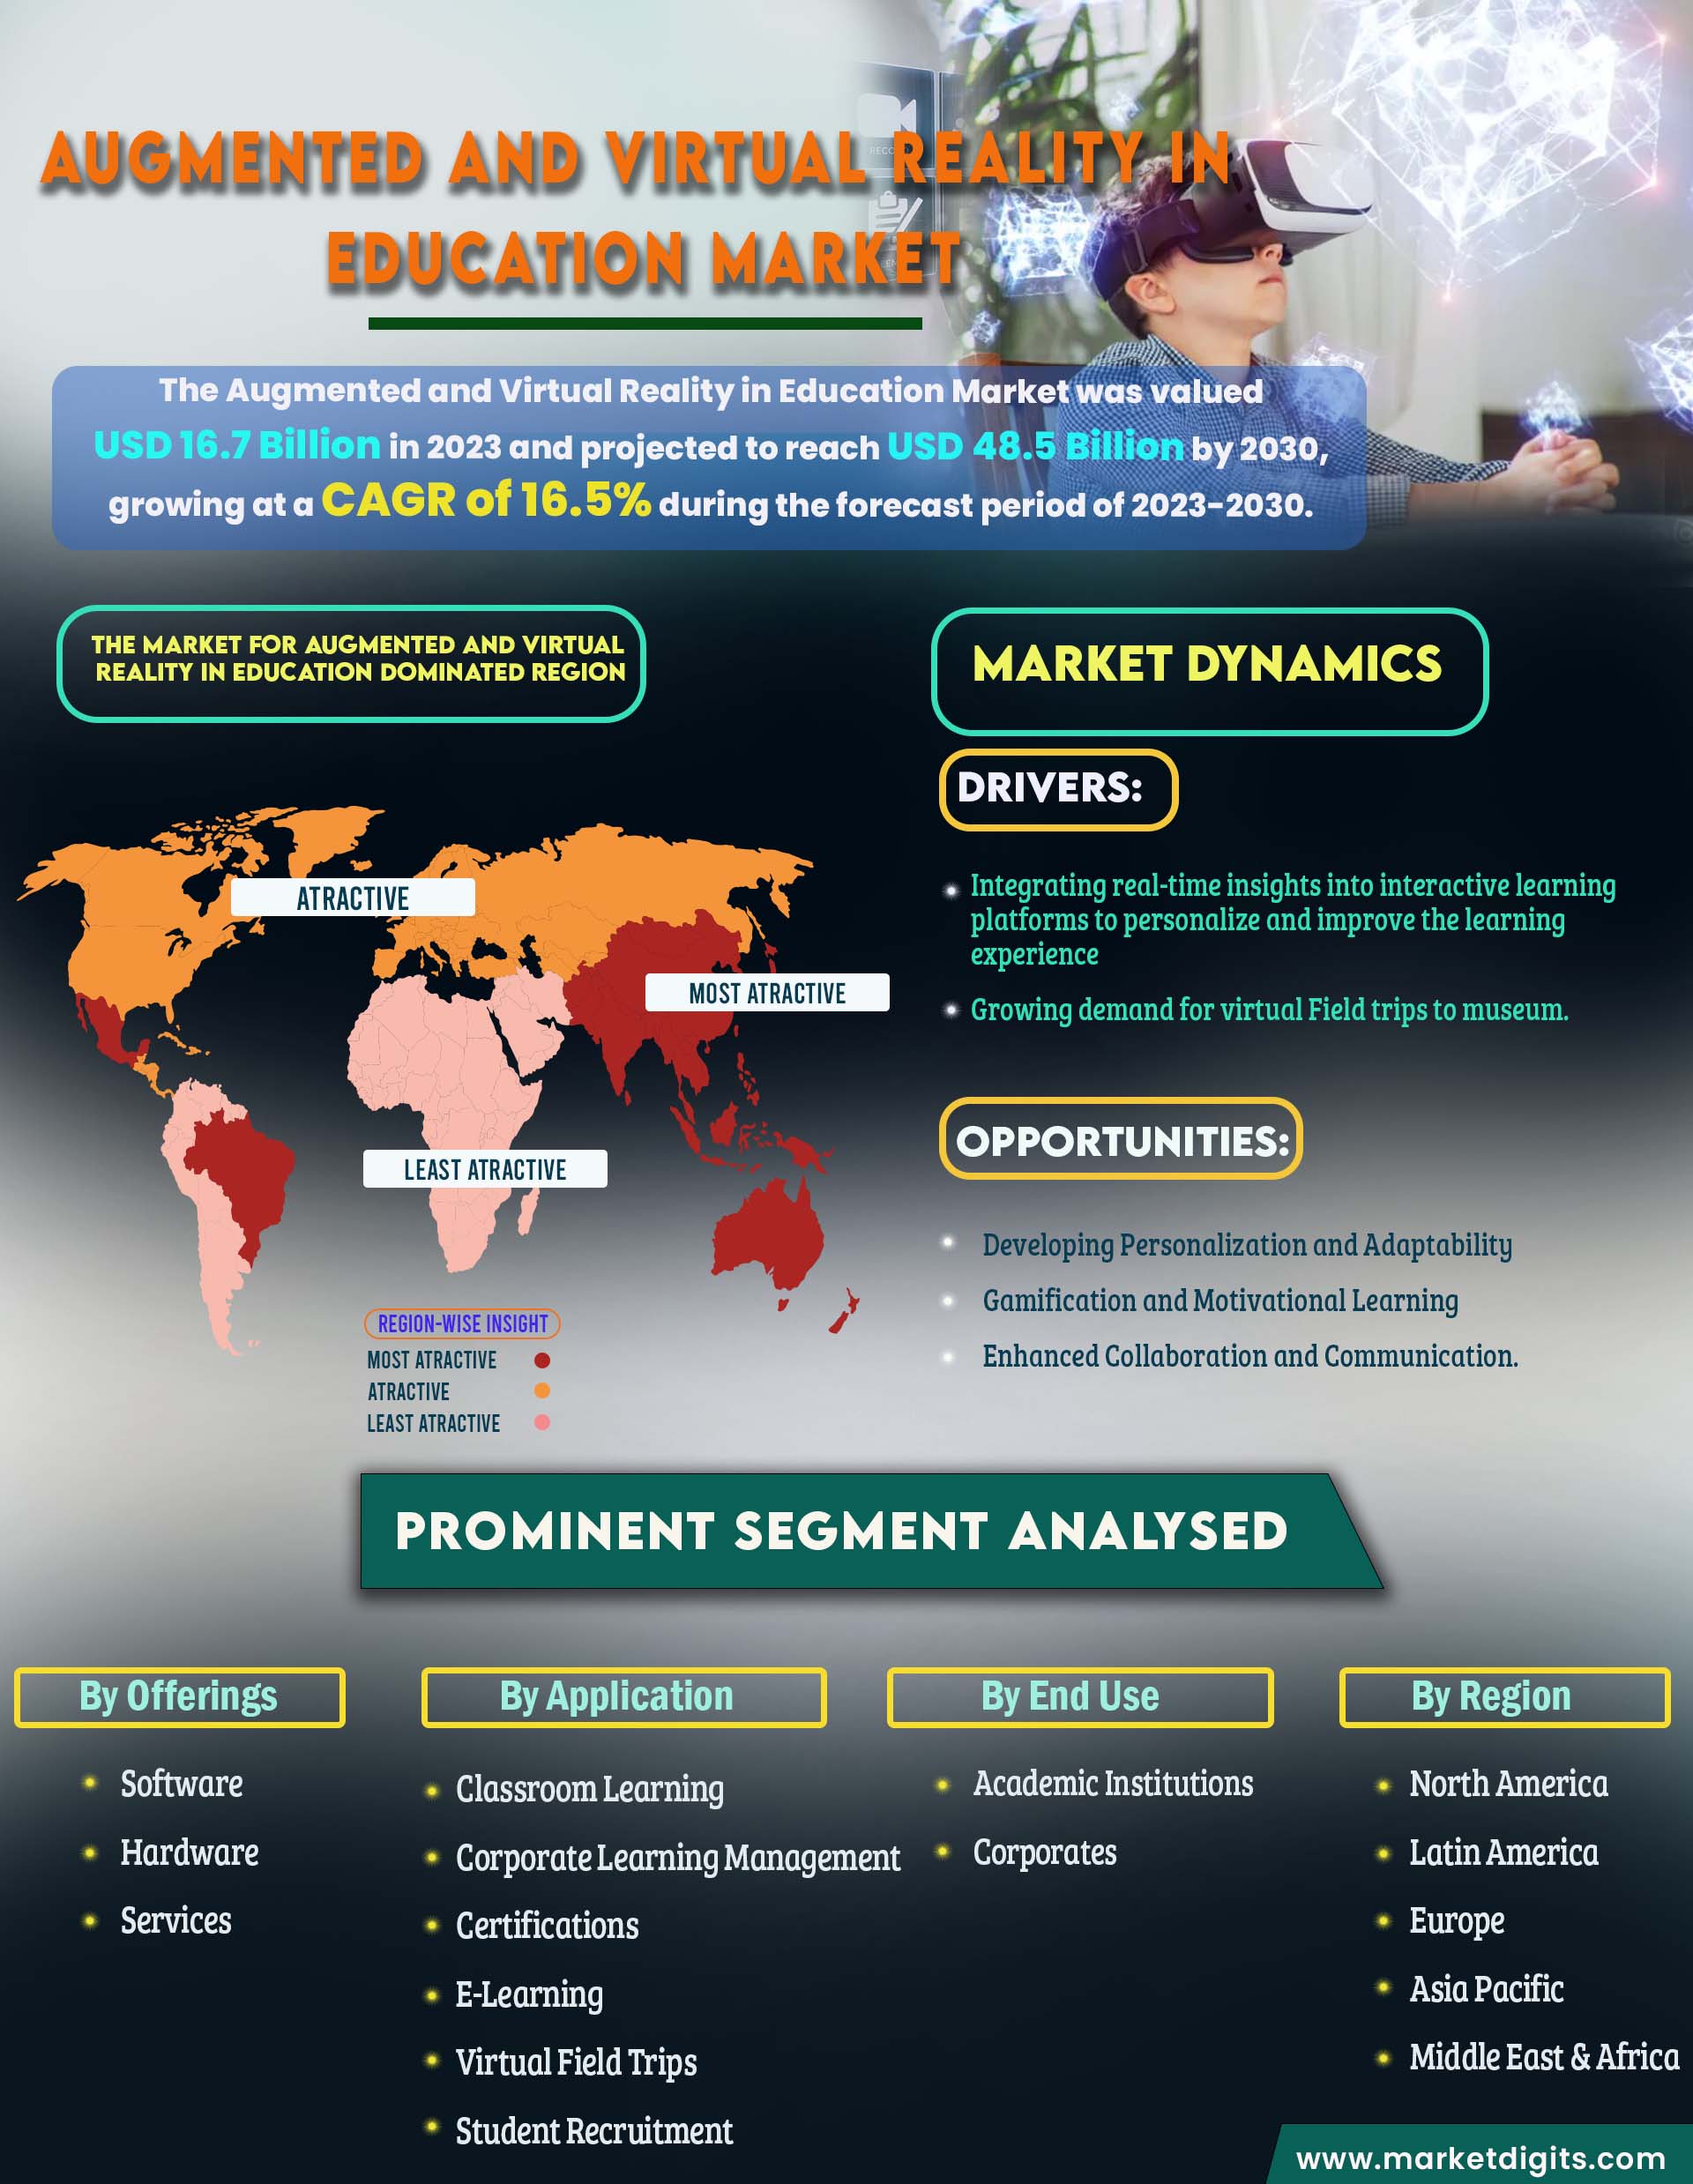 Augmented and Virtual Reality in Education Market